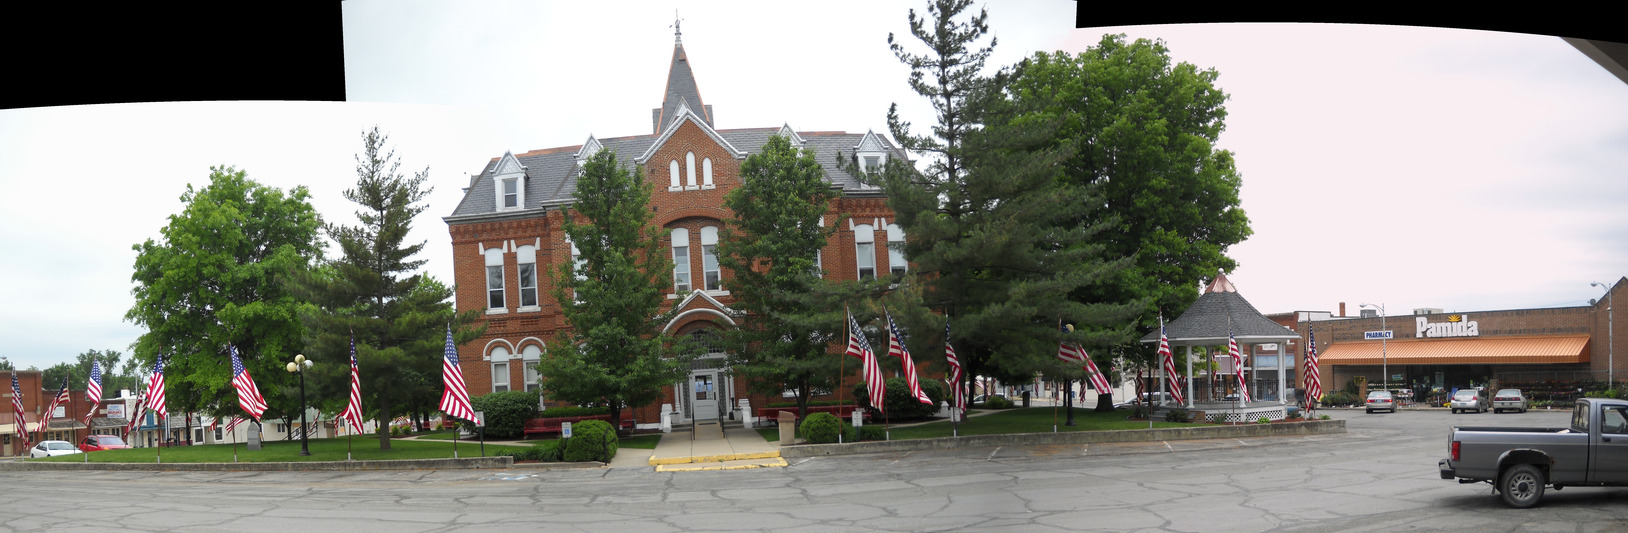 Albany, MO: Gentry County Courthouse in Albany, Mo